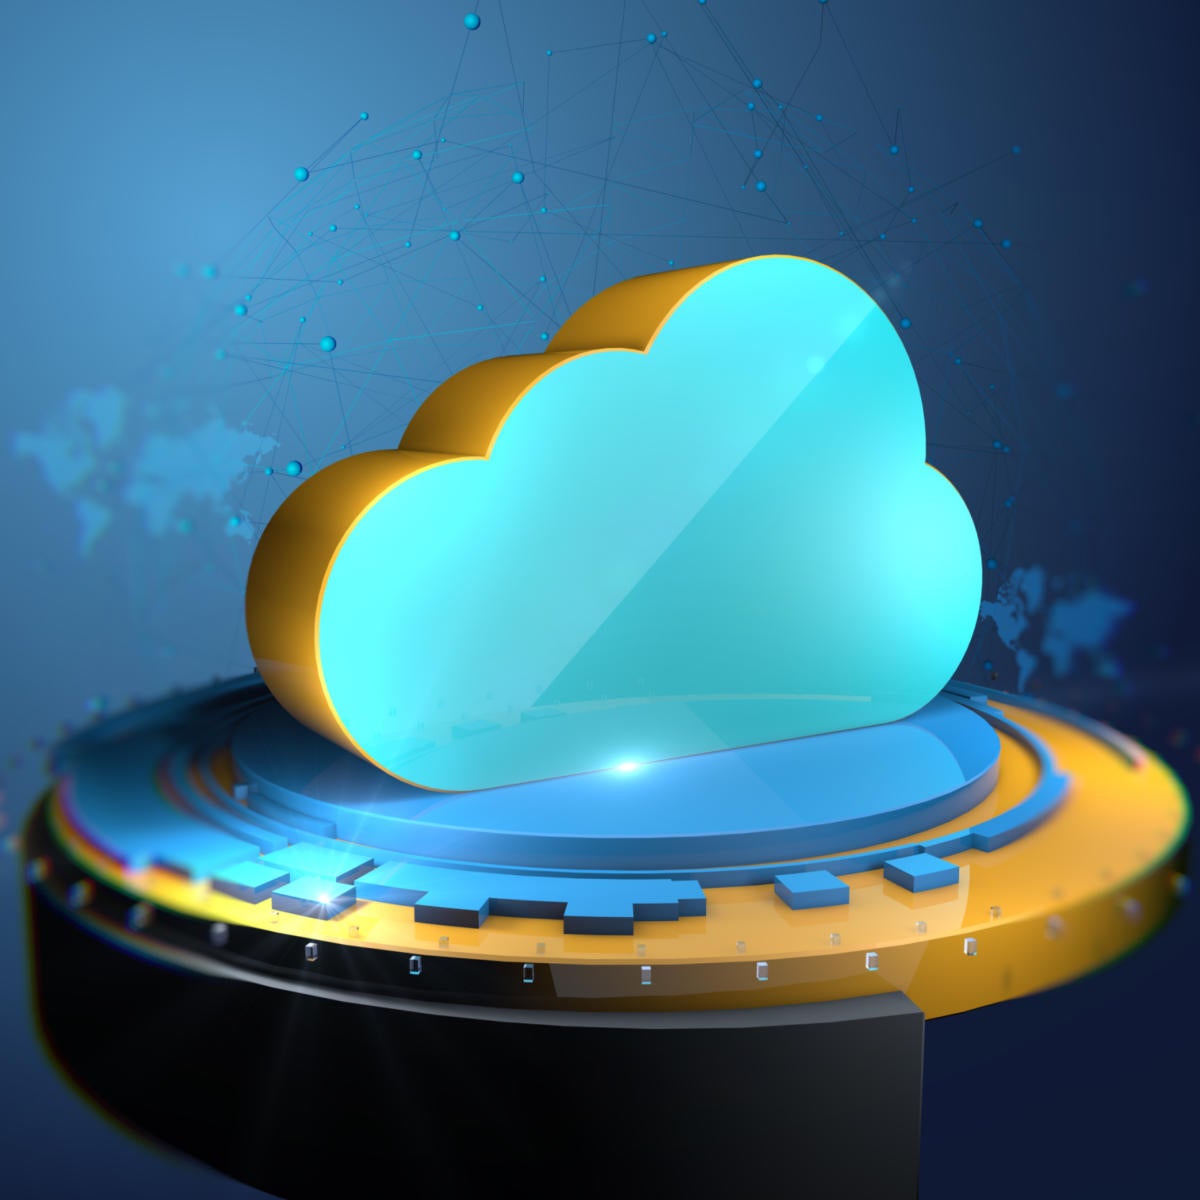 Microsoft Azure Stack brings the cloud to your data center